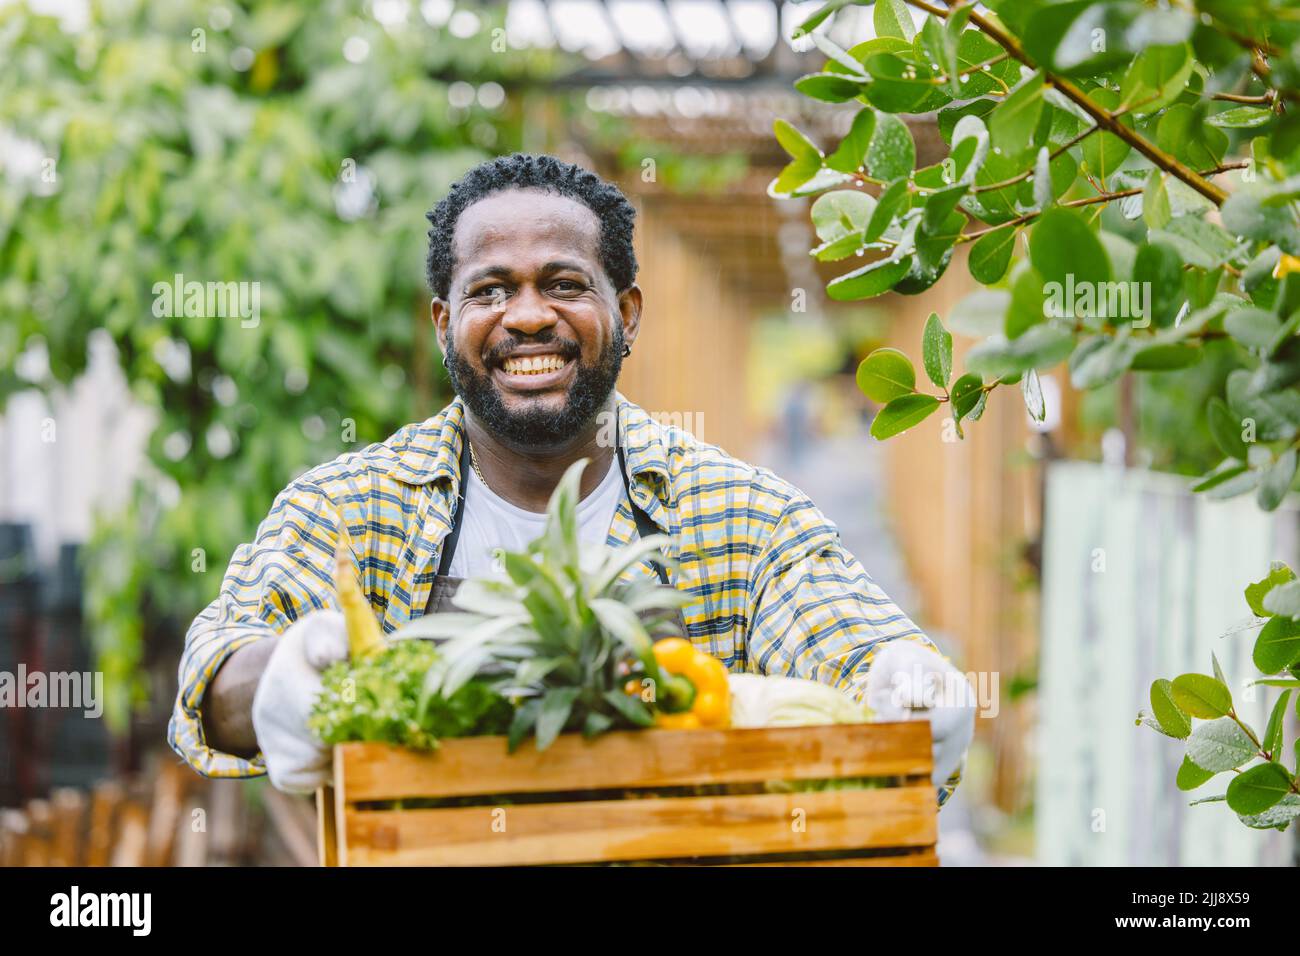 happy farmer showing agricultural home grow crops vegetables and fruits from his own farm enjoy plant working smiling. Stock Photo